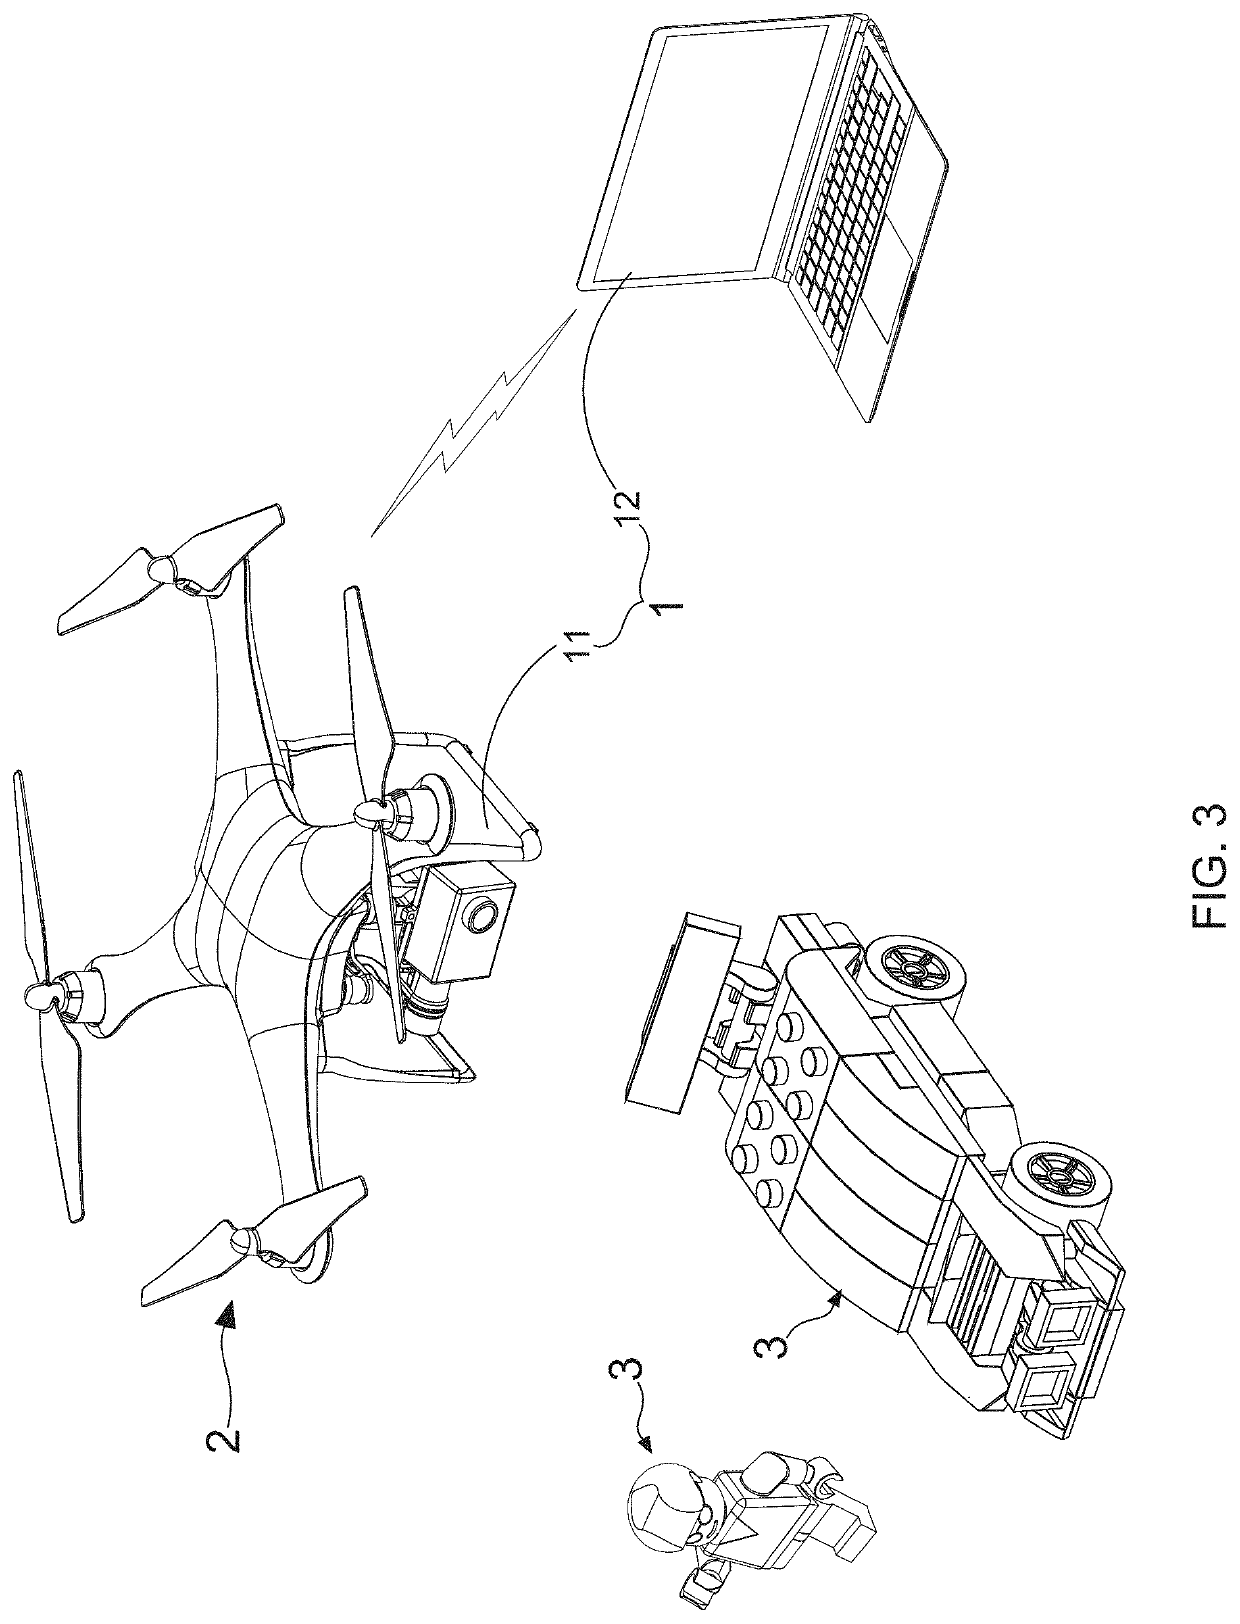 Moving object detection system and method